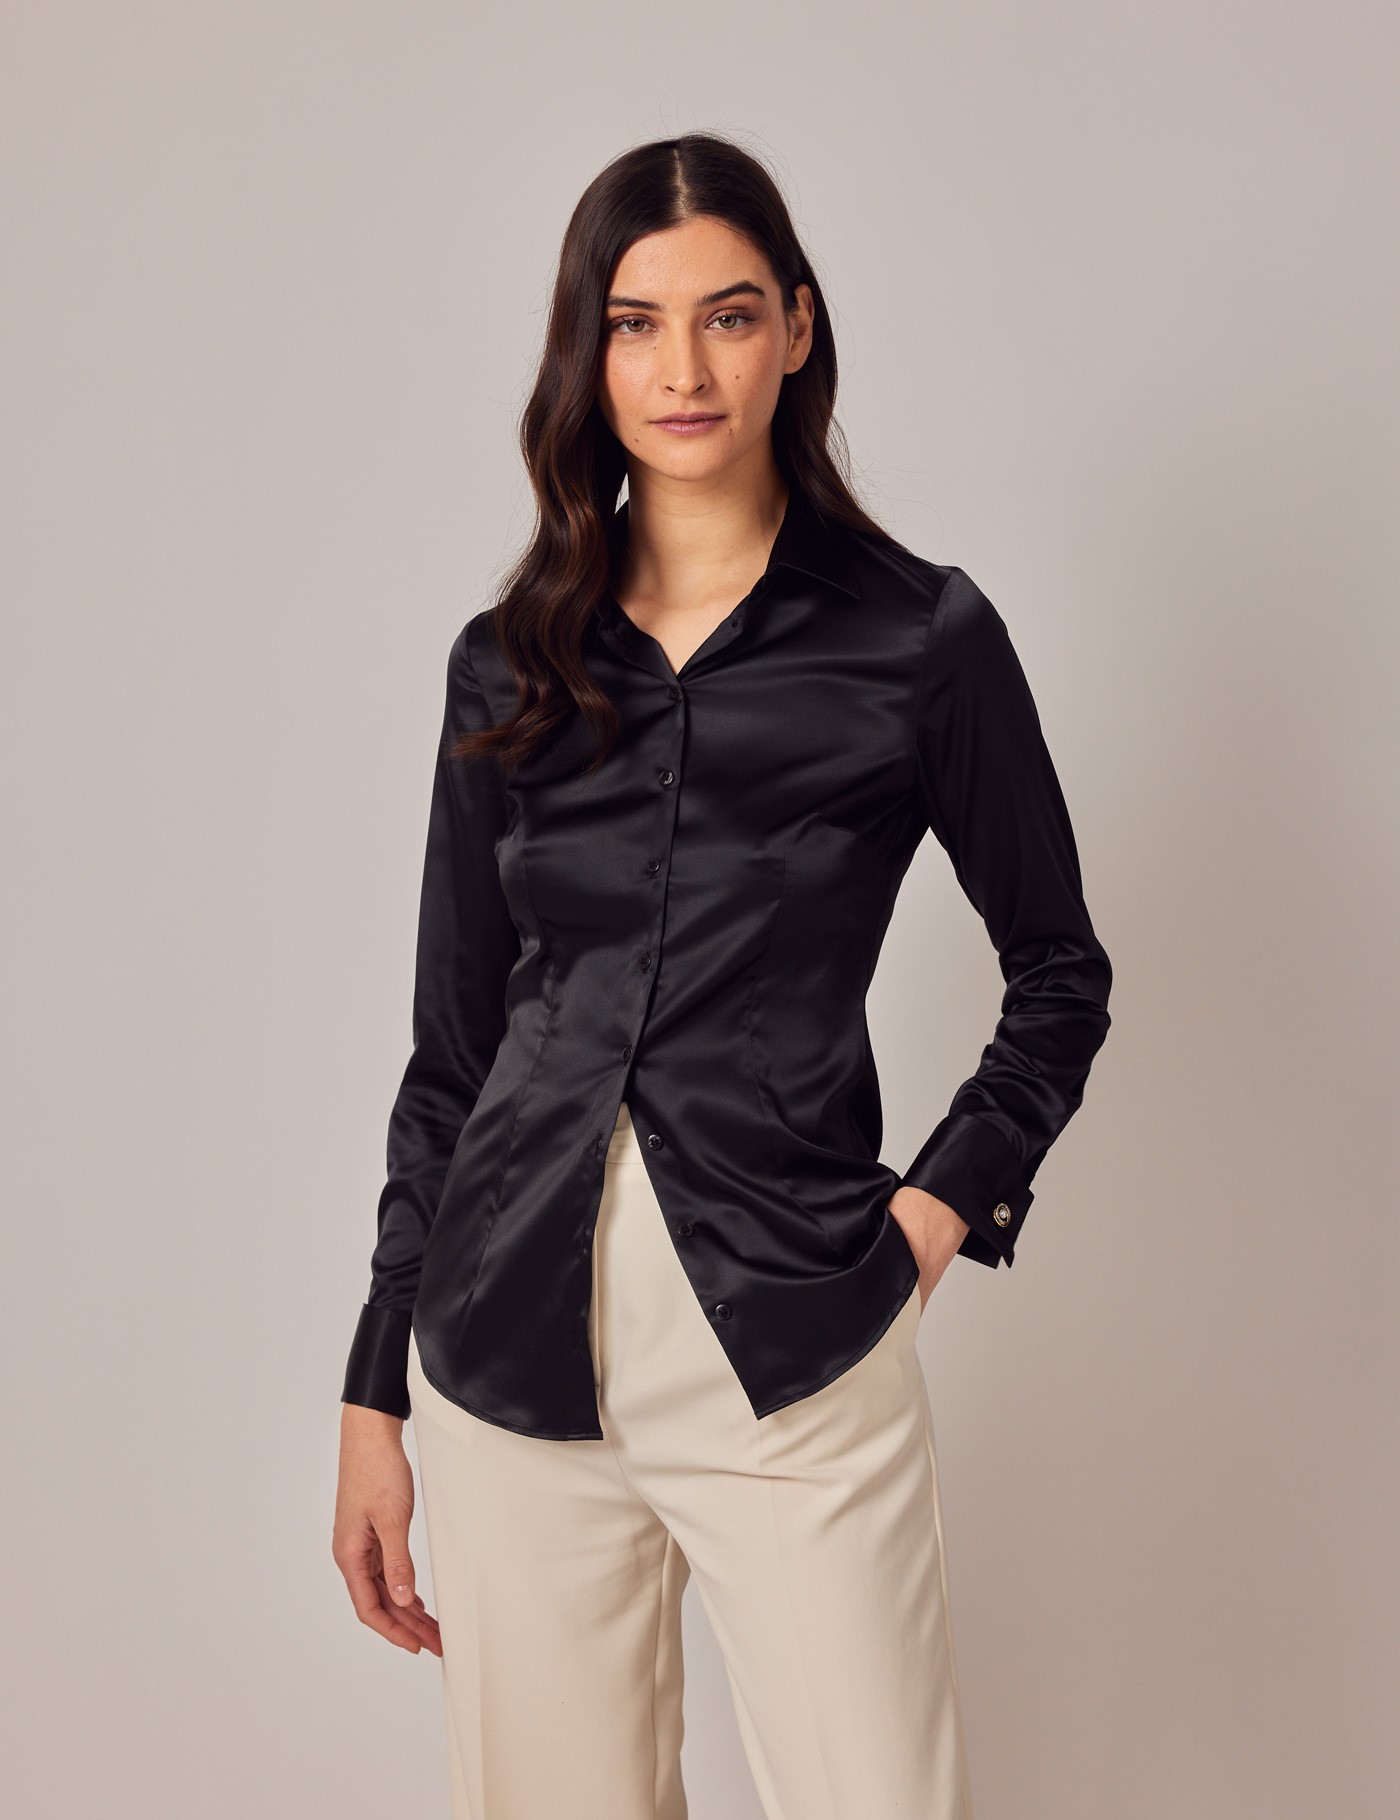 Women's Black Fitted Satin Shirt - Double Cuffs